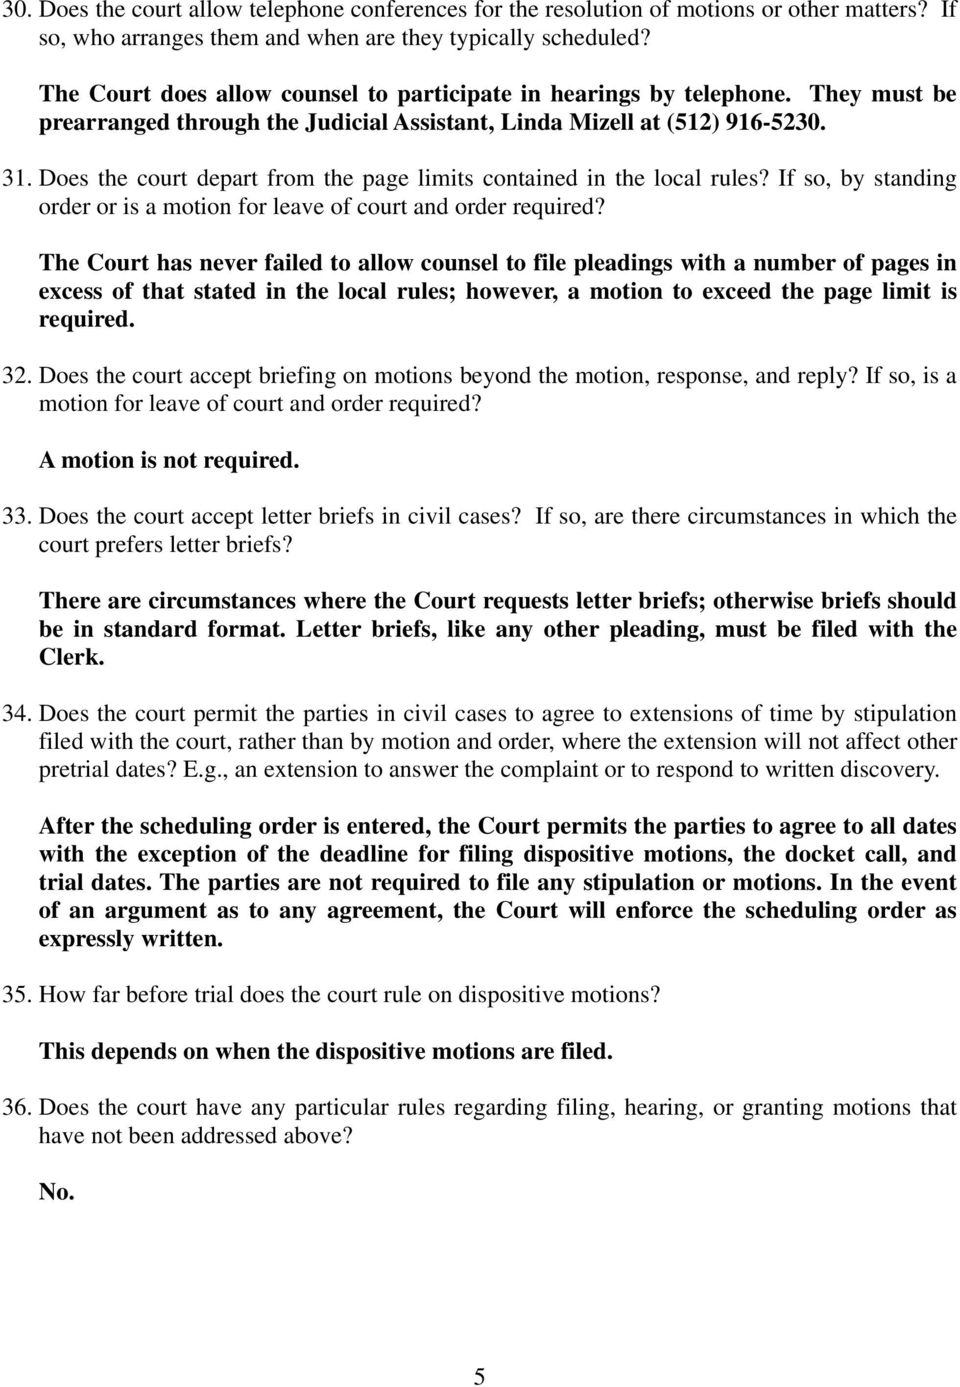 Does the court depart from the page limits contained in the local rules? If so, by standing order or is a motion for leave of court and order required?